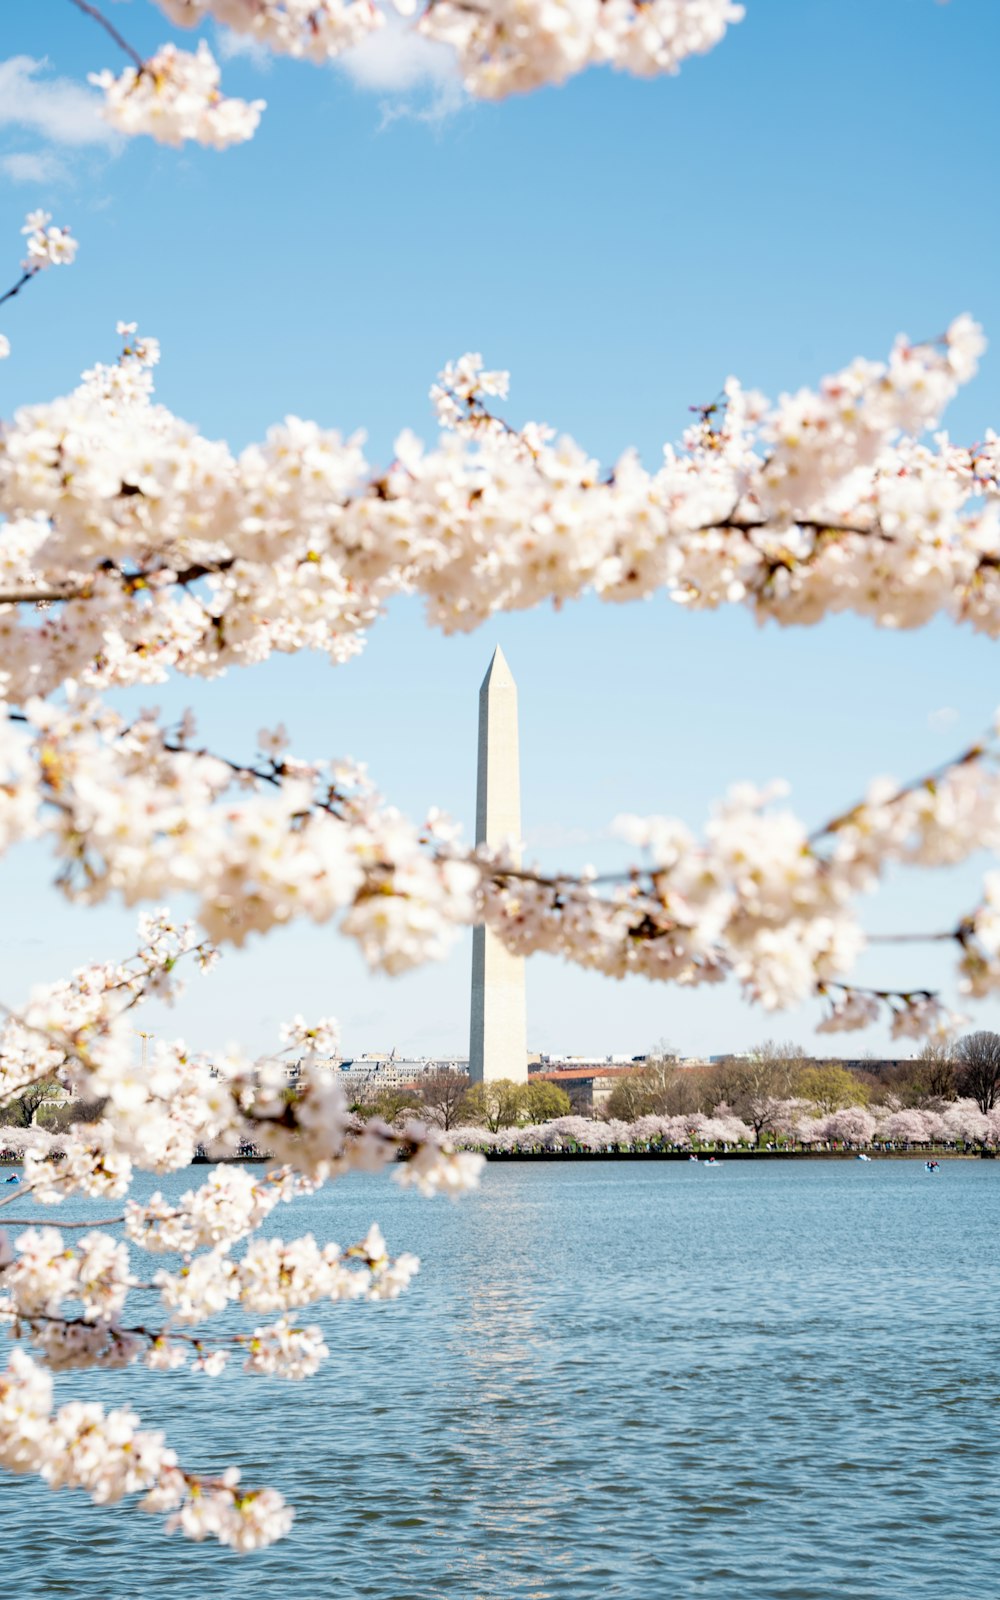 the washington monument is seen through the cherry blossoms